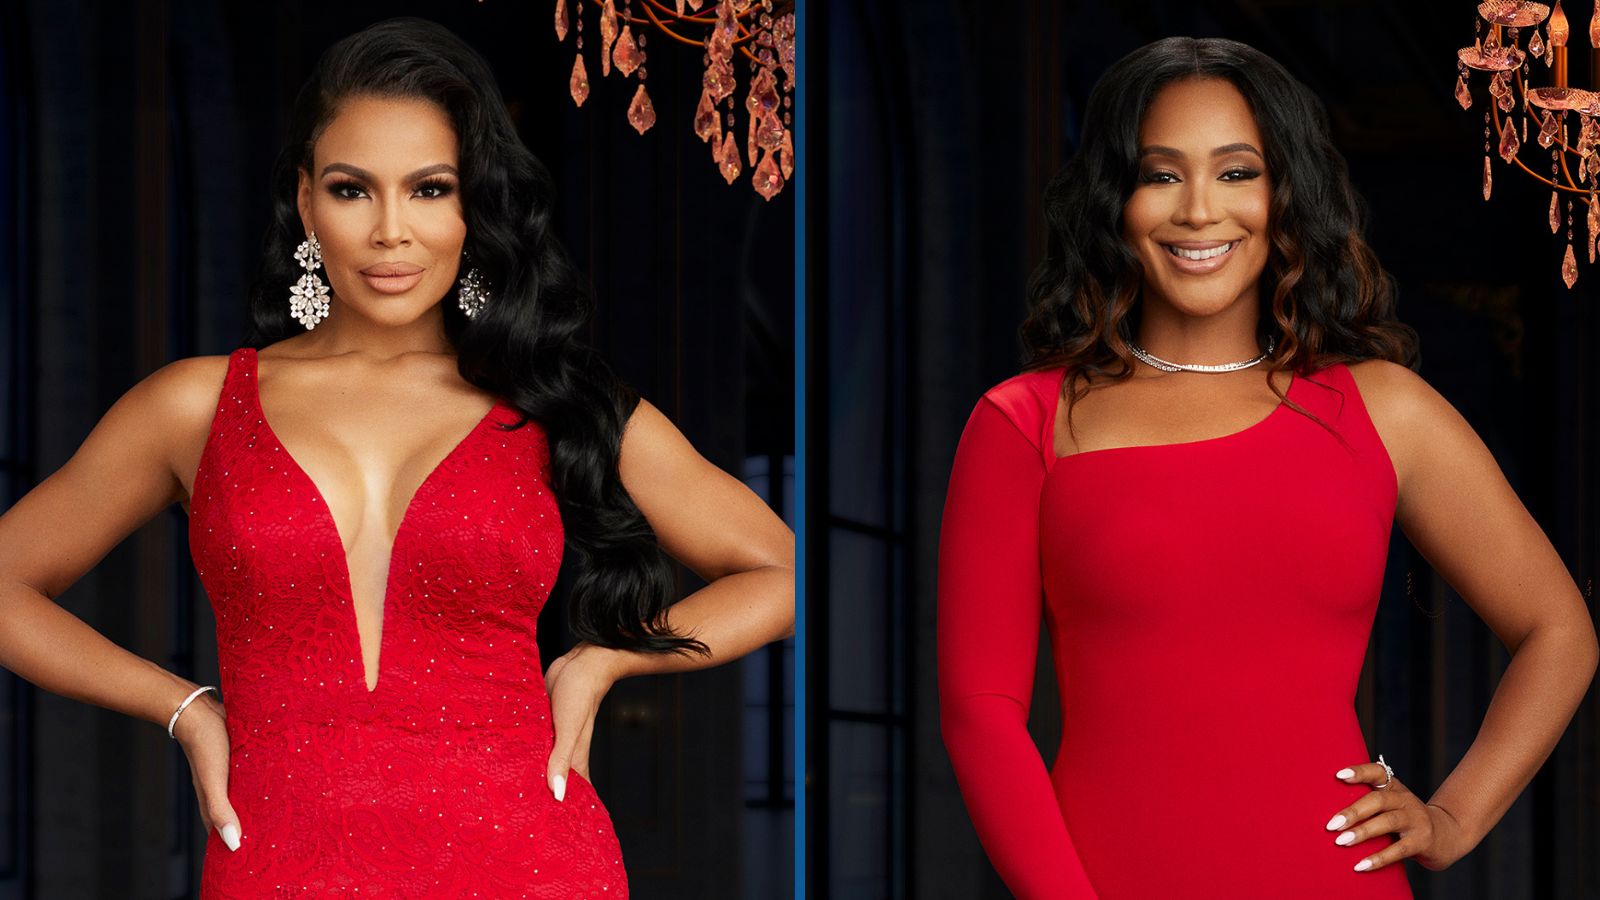 leaked text messages, RHOP reunion, Real Housewives of Potomac reunion, Mia Thornton, Jacqueline Blake